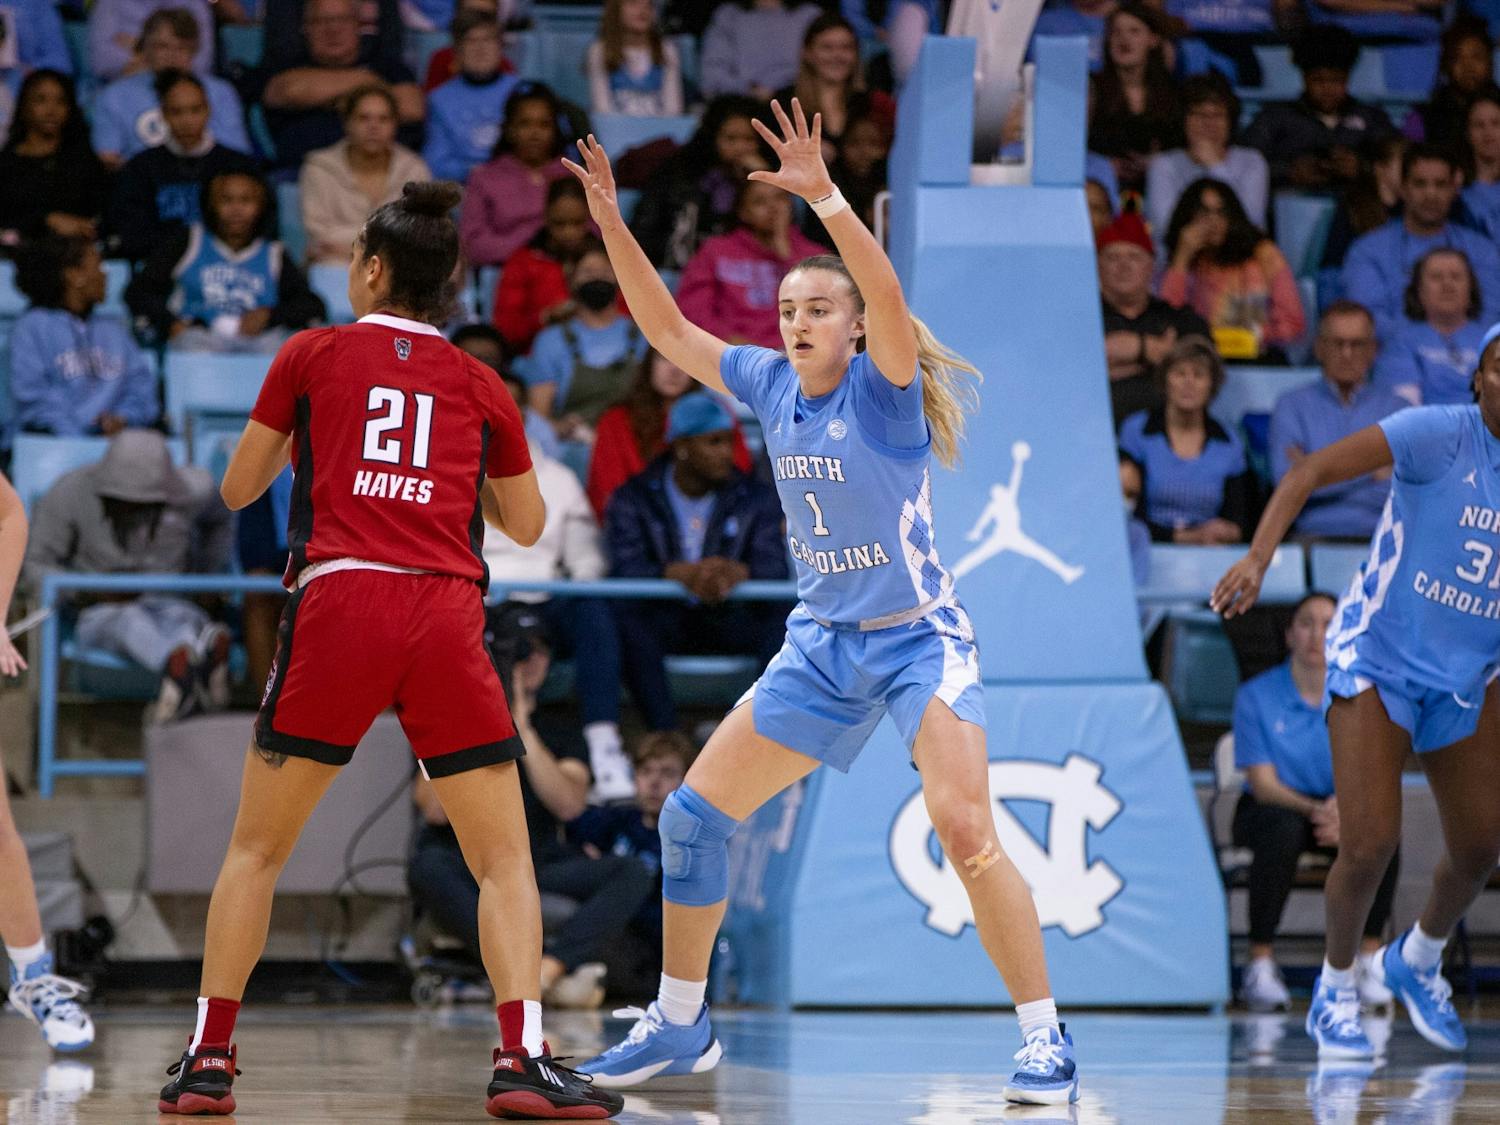 UNC junior guard/forward Alyssa Ustby (1)  defending during the women's basketball game against the NC State Wolfpack in Carmichael Arena on Sunday, Jan. 15, 2023. The Tar Heels won 56-47.